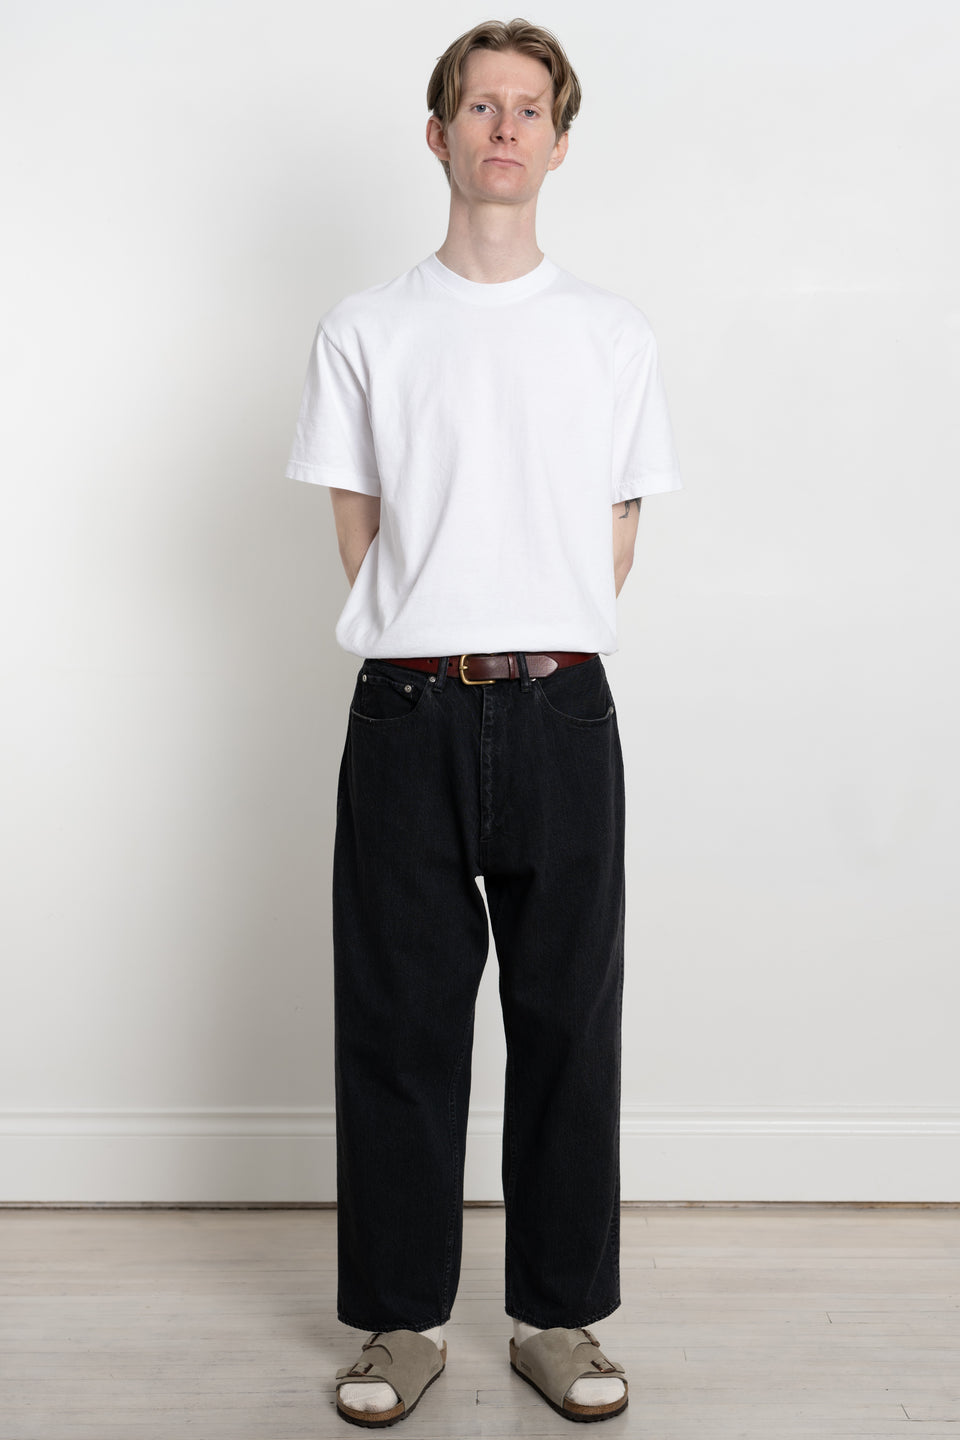 ENDS and MEANS spring summer 2024 SS24 24SS Men's Collection from Japan 5 pockets baggy denim washed black